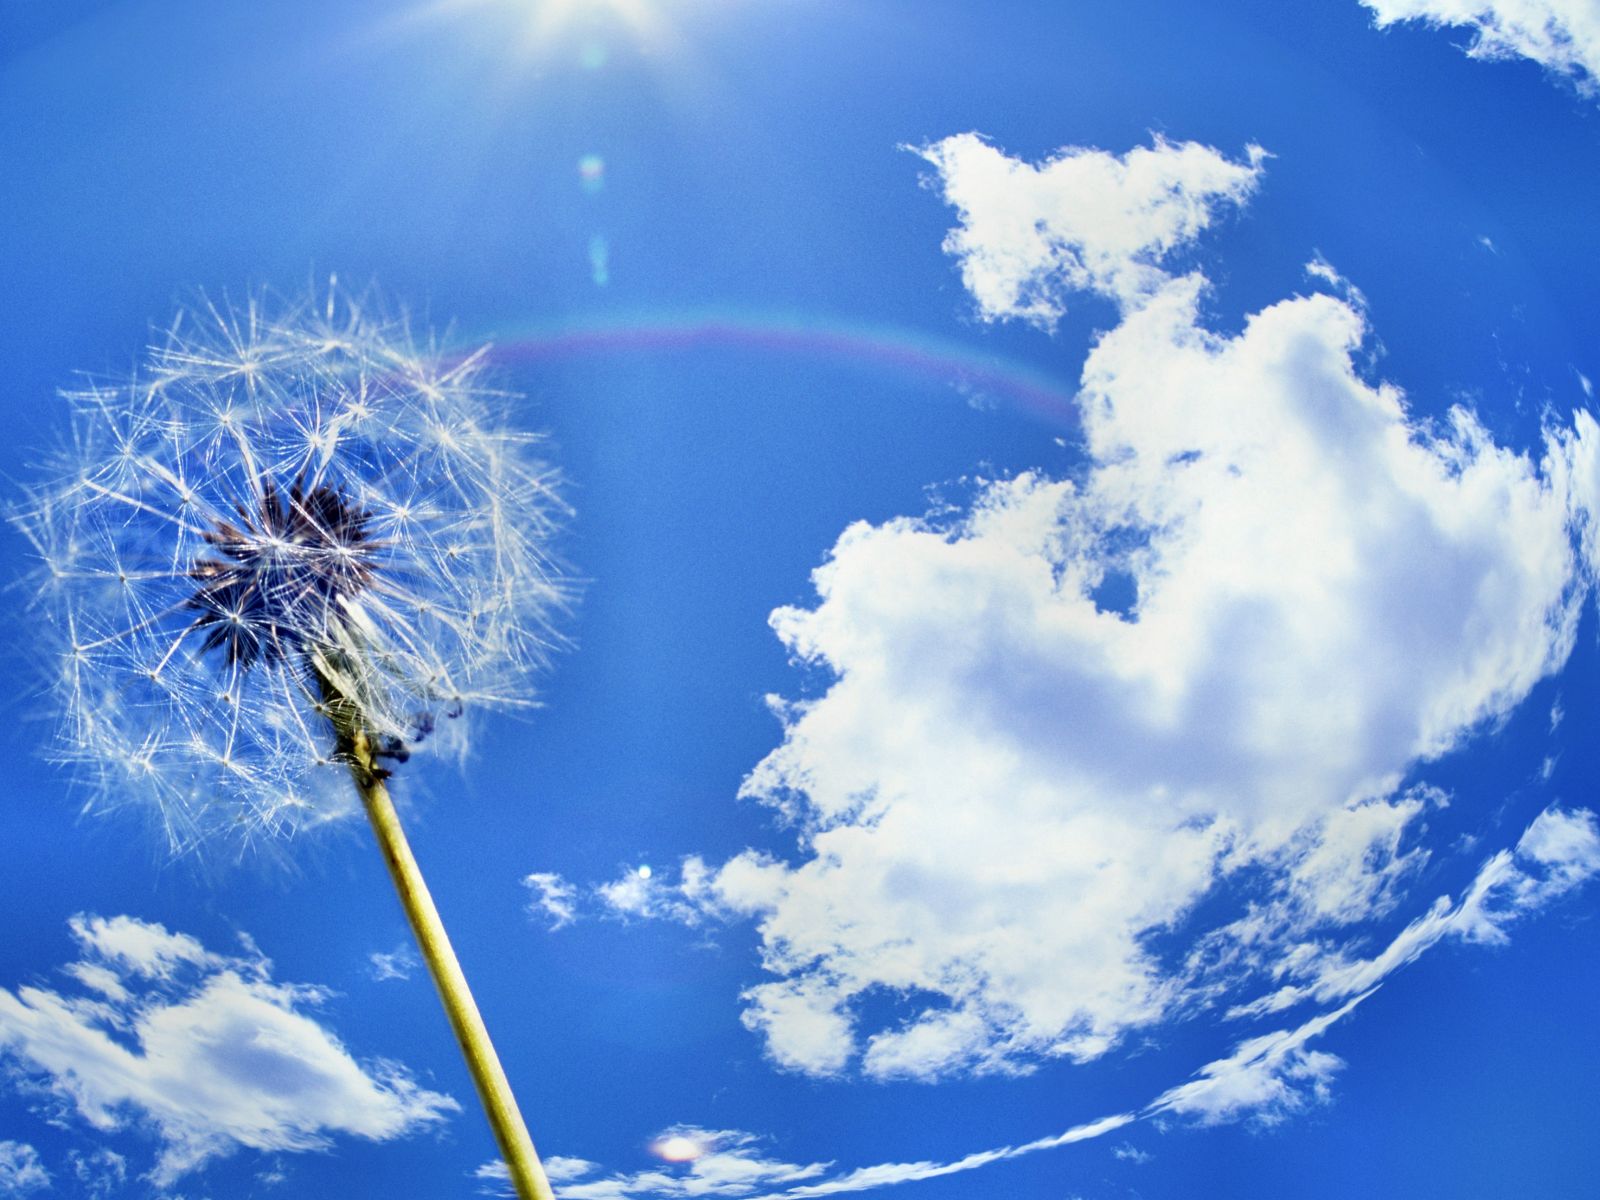  Backgrounds Windows 7 Dandelion Wallpaper and make this wallpaper for